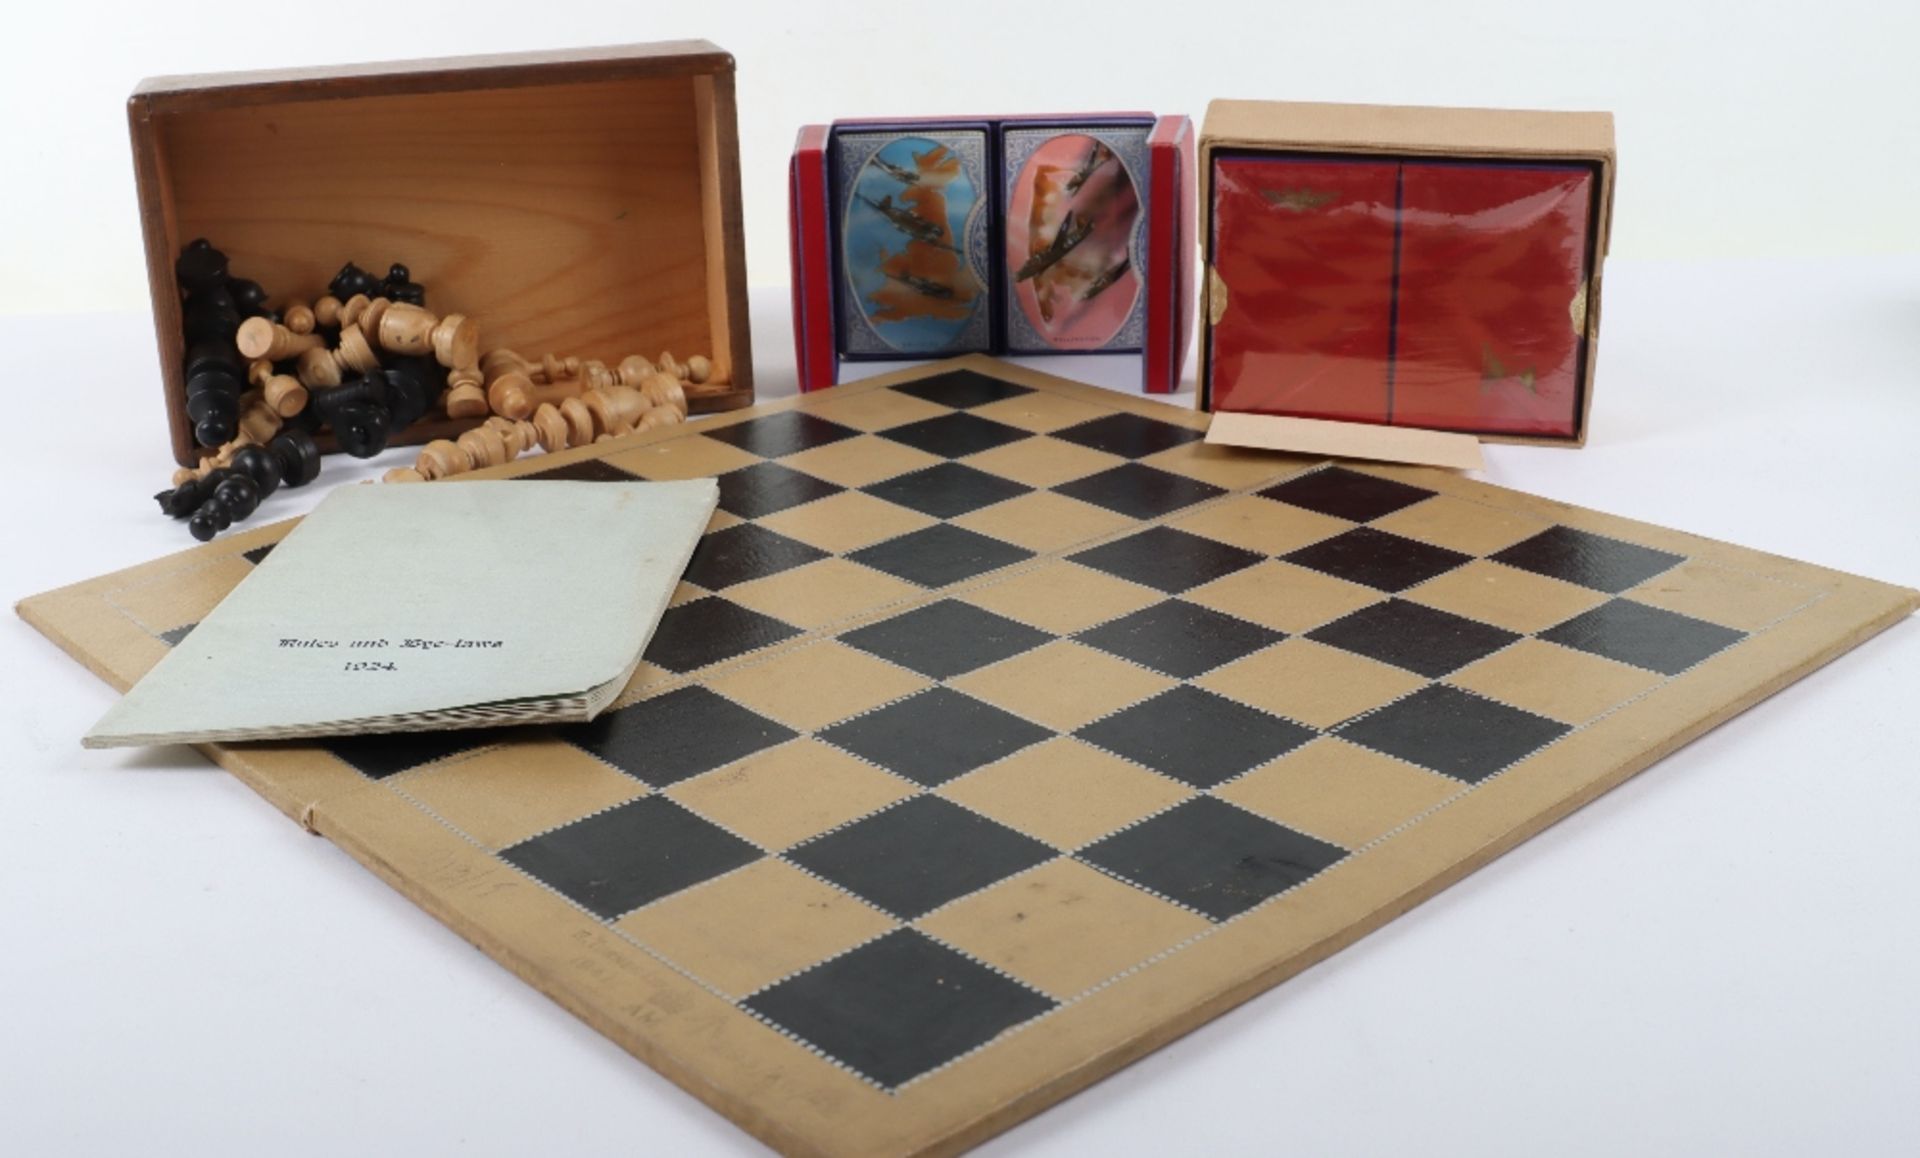 WW2 RAF Gamed Board/Chess Set and Card Sets - Image 7 of 7